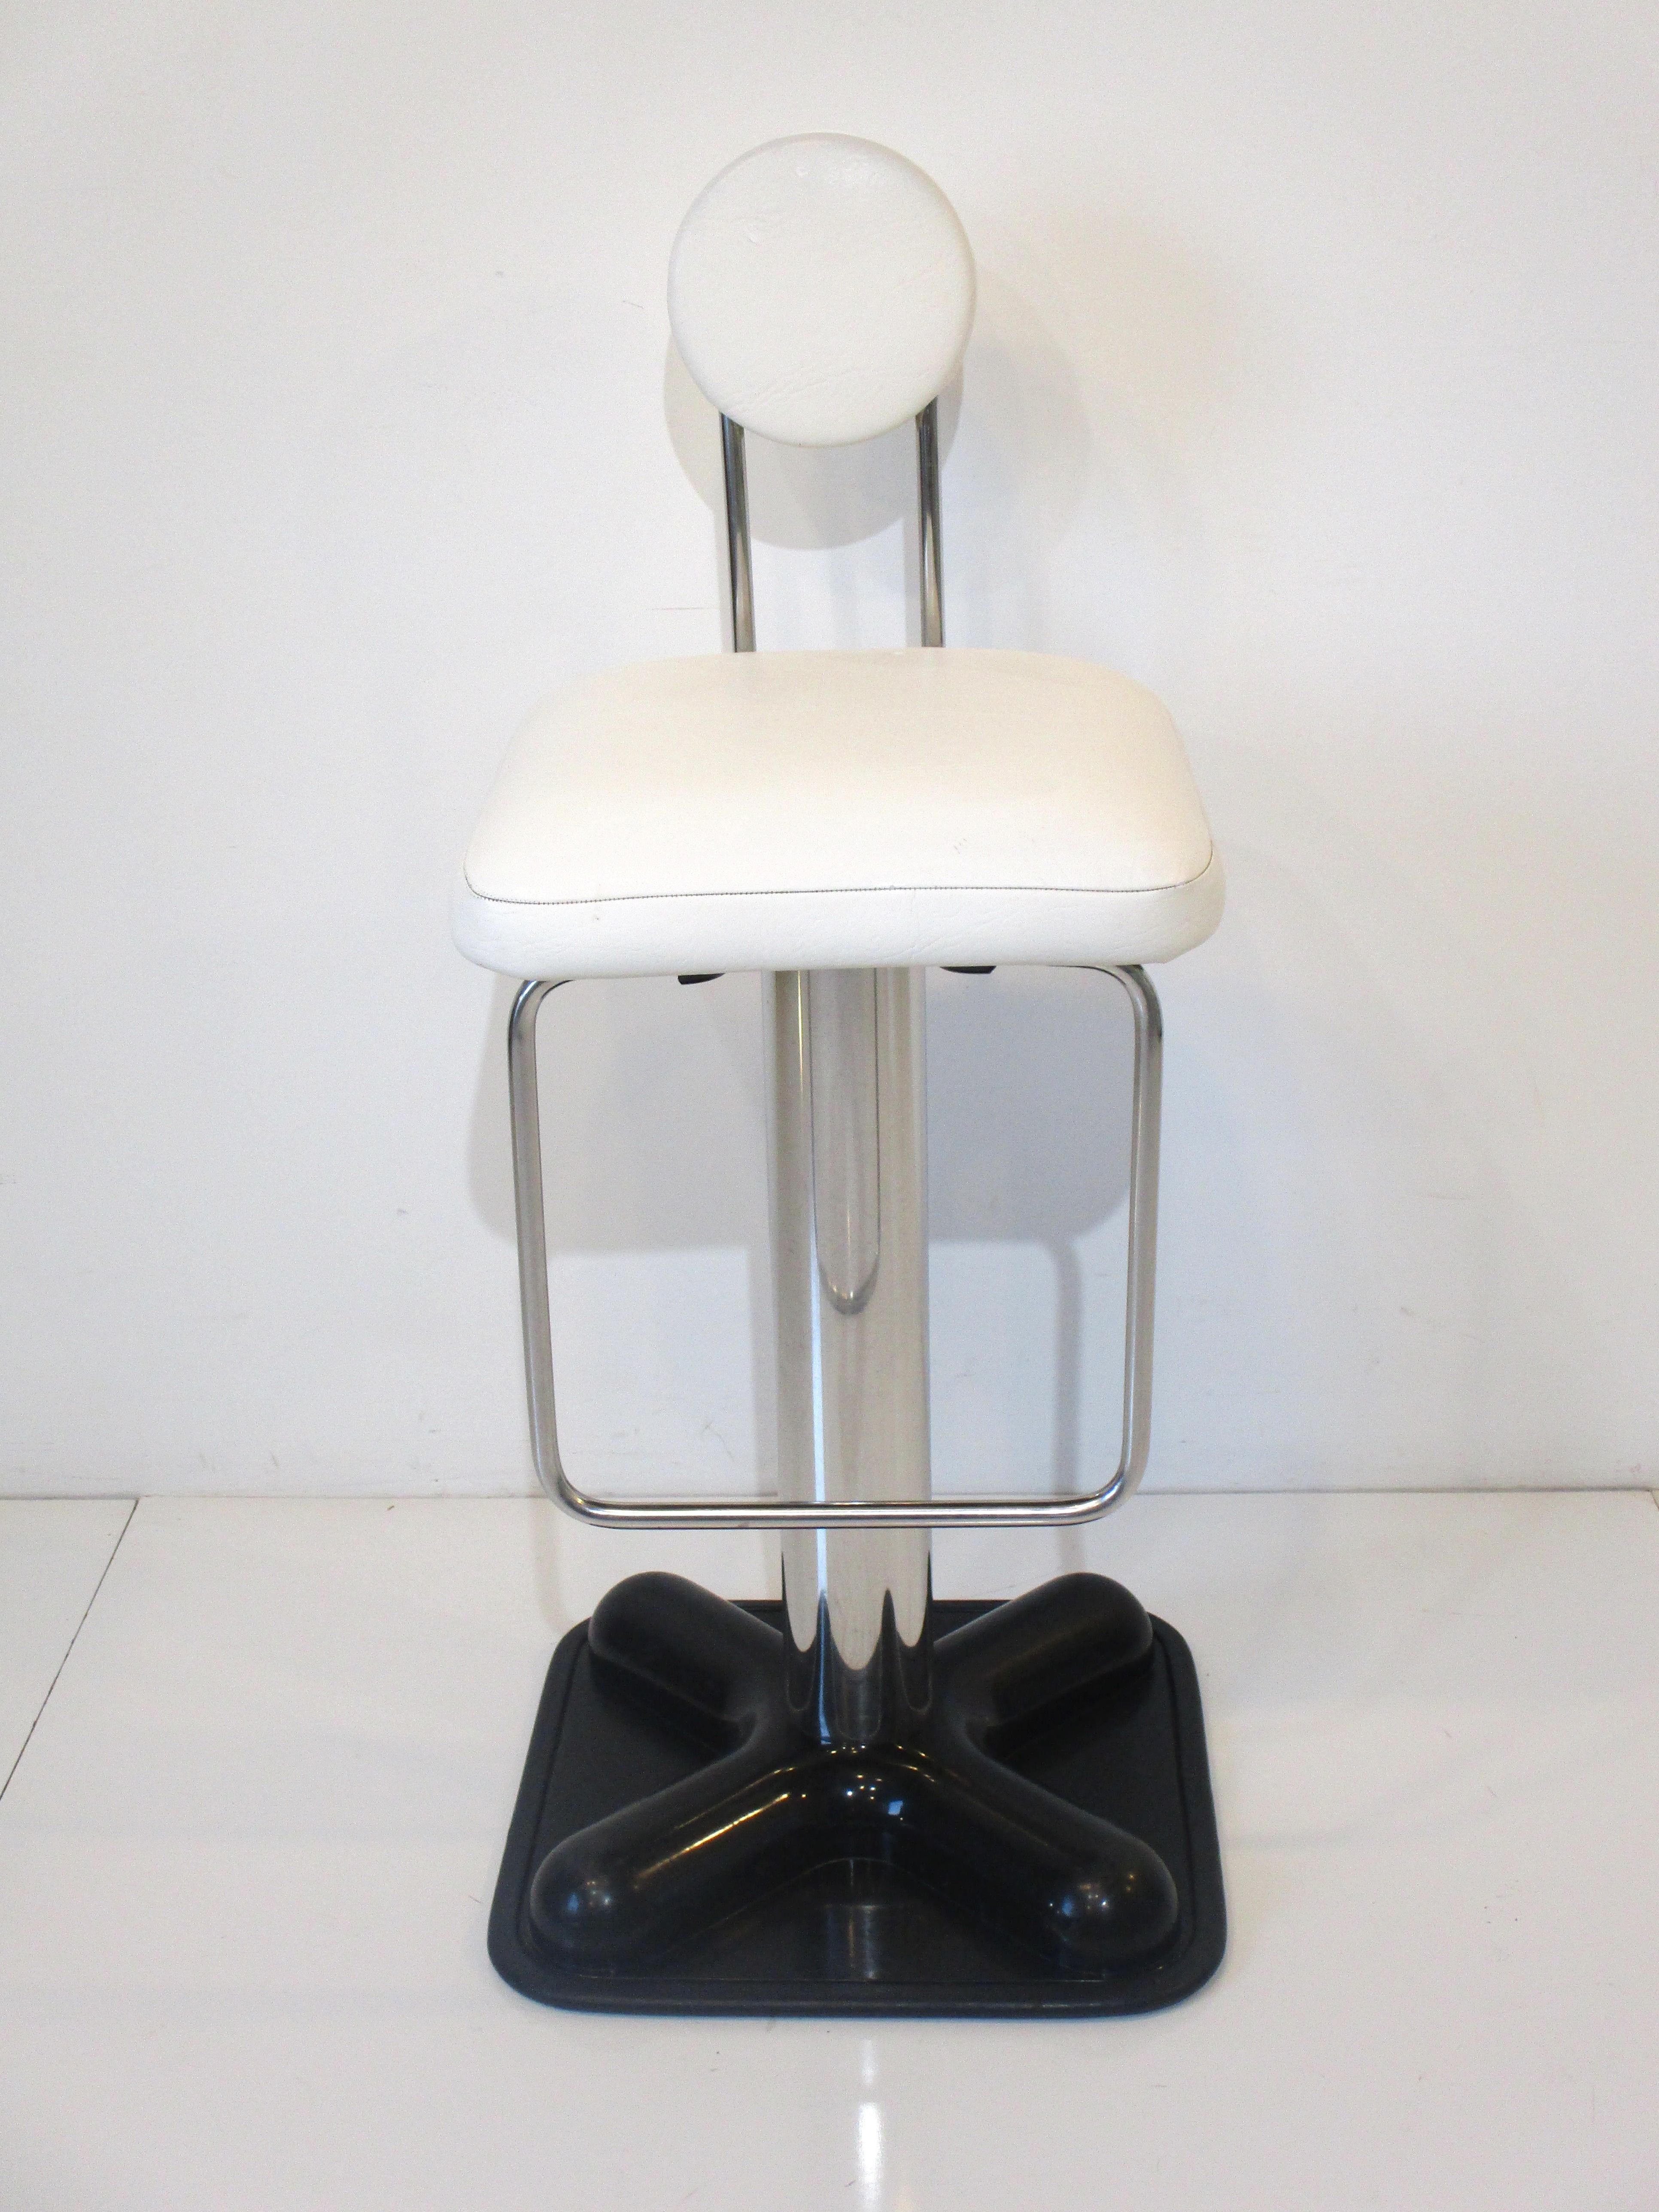 A mod pop art bar or counter Birillo stool by iconic Italian designer Joe Colombo with square seat bottom and lollipop styled seat back in white vinyl . Having a heavy duty chromed metal pole shaft with foot rest sitting on a satin black ABS molded